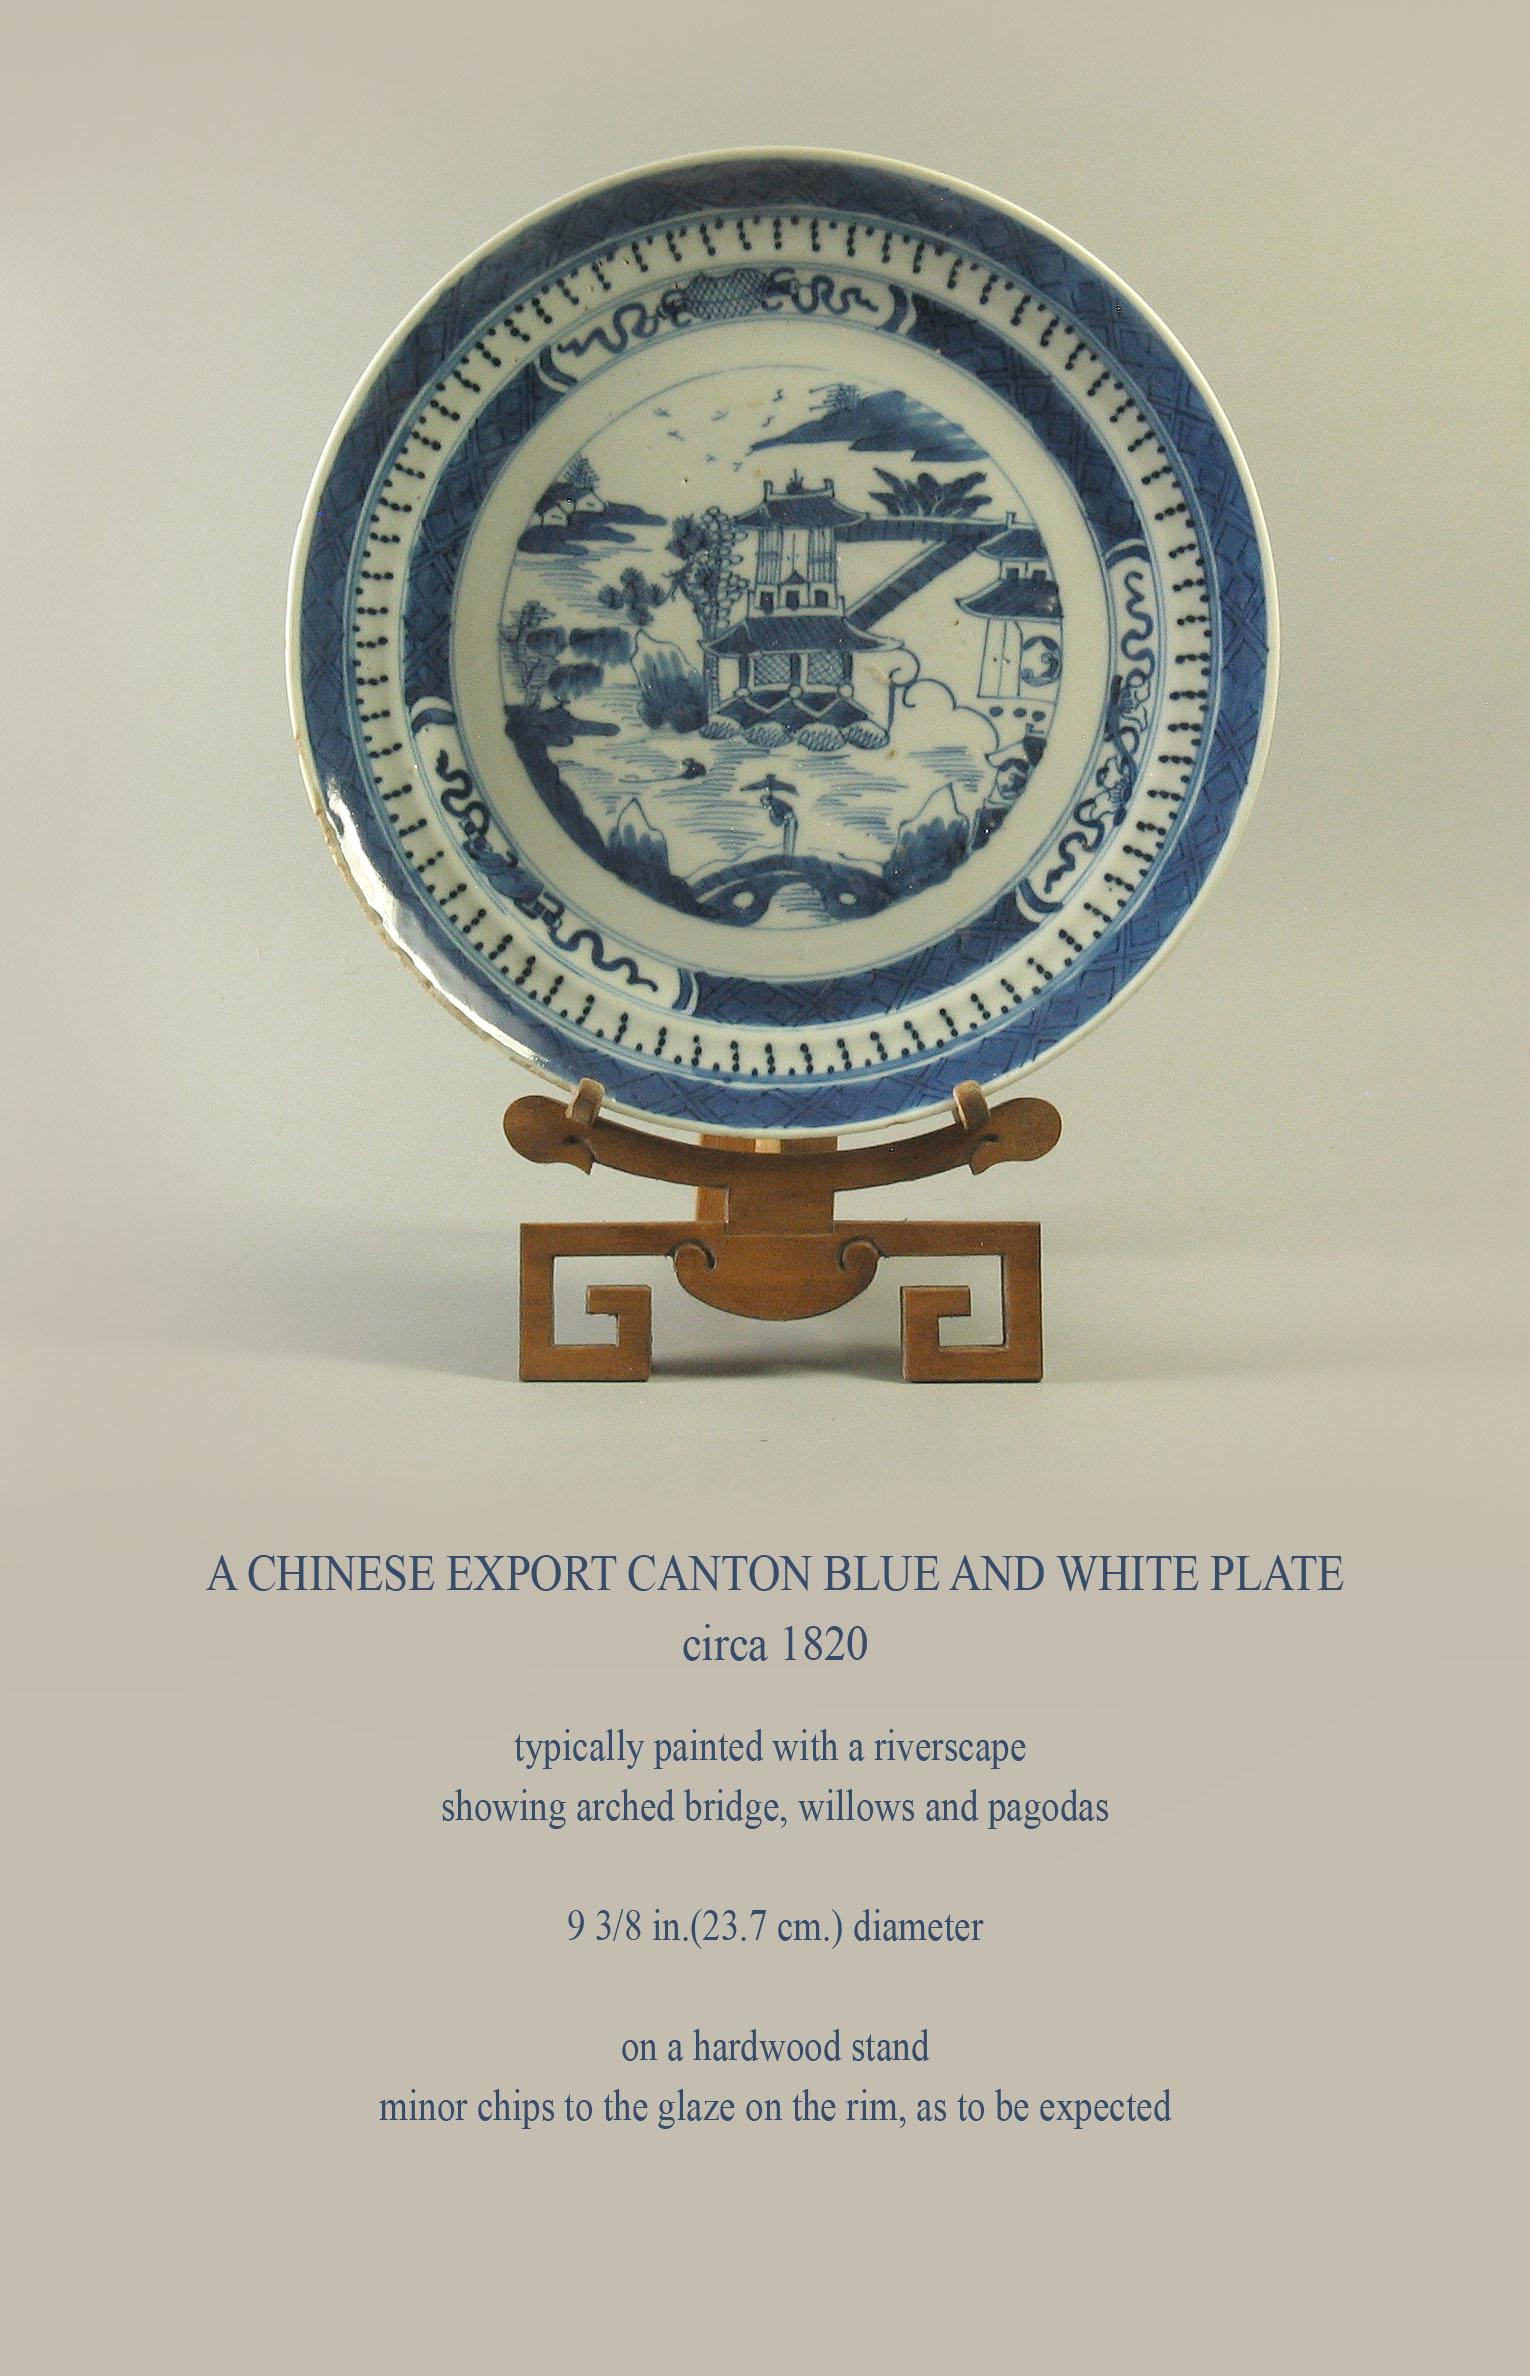 A Chinese export canton blue and white plate

circa 1820
Typically painted with a riverscape 
showing arched bridge, willows and pagodas...

Measures: 9 3/8 in.(23.7 cm.) diameter

On a hardwood stand,
minor chips to the glaze on the rim,